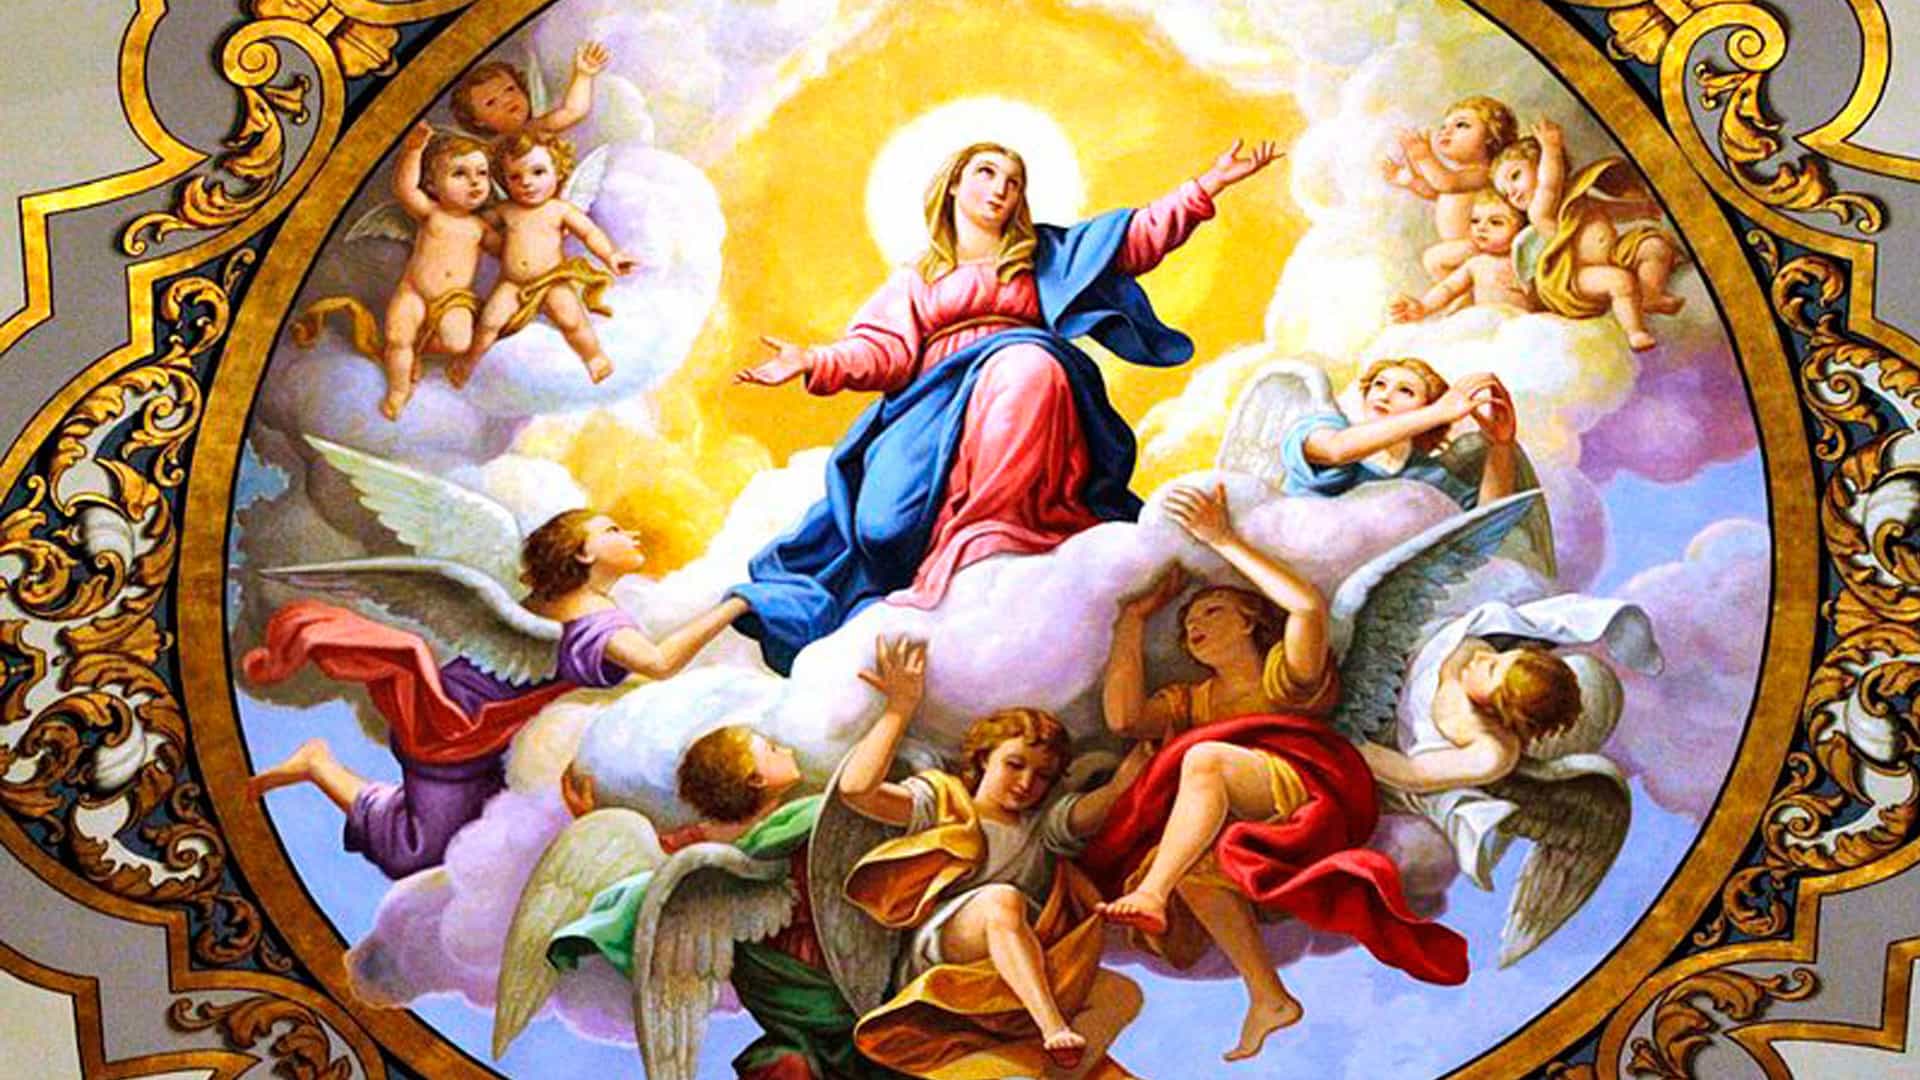 Image of the Assumption of Mary with Angels raising Her to Heaven